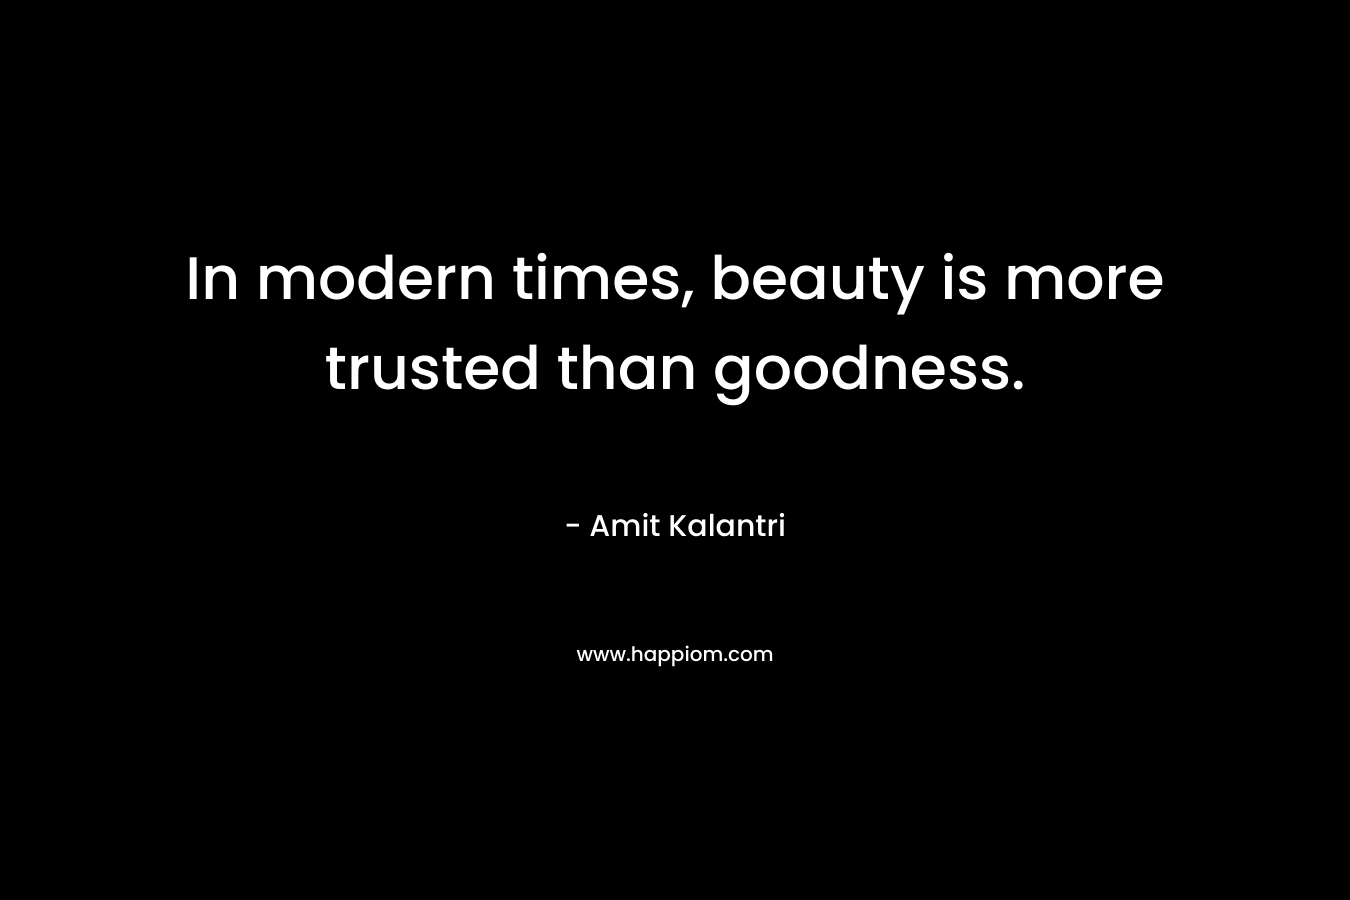 In modern times, beauty is more trusted than goodness.